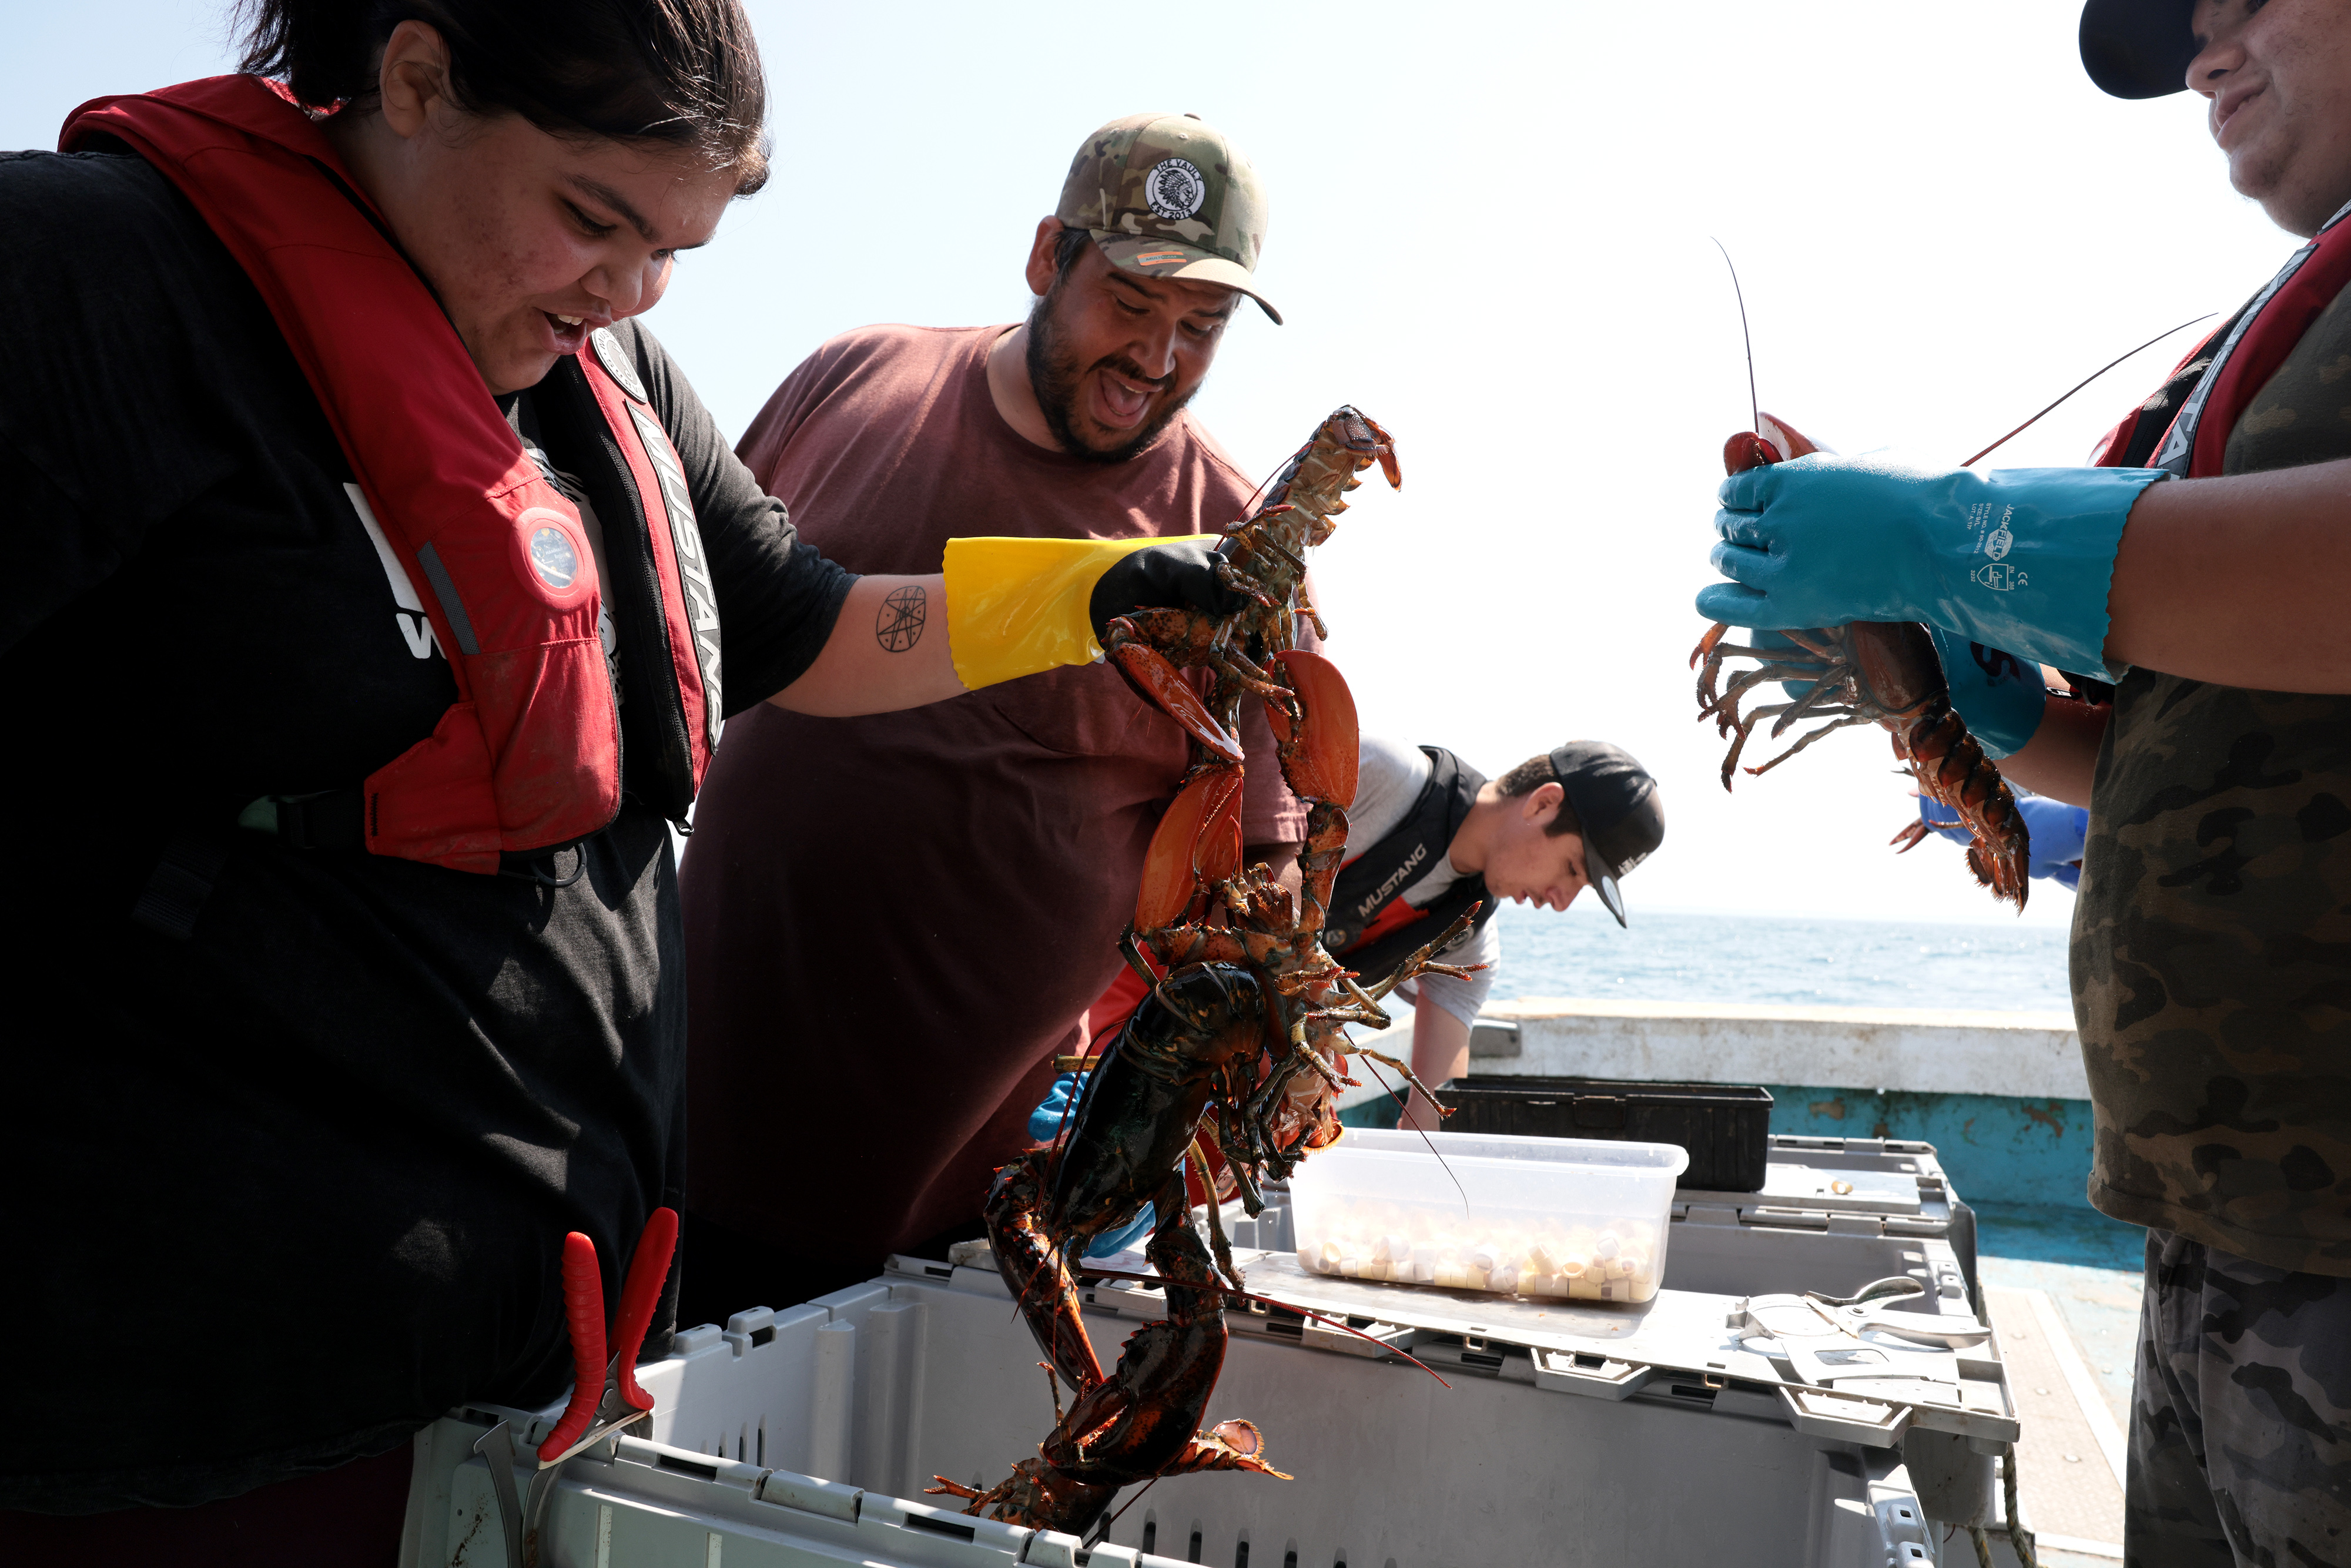 Kaleah Sack, 18, (left) laughed as she pulled up a clump of lobsters with her uncle, James Nevin, (right) beside her, as they checked their treaty traps off Saulnierville, Nova Scotia, on Aug 26. On each of the traps, a special green tag identified them as belonging to his band of the Mi’kmaw people, who insist that a 269-year-old treaty grants them the right to fish when and how they want. But the Canadian government has rejected their assertions, and fisheries officials have been seizing their traps.